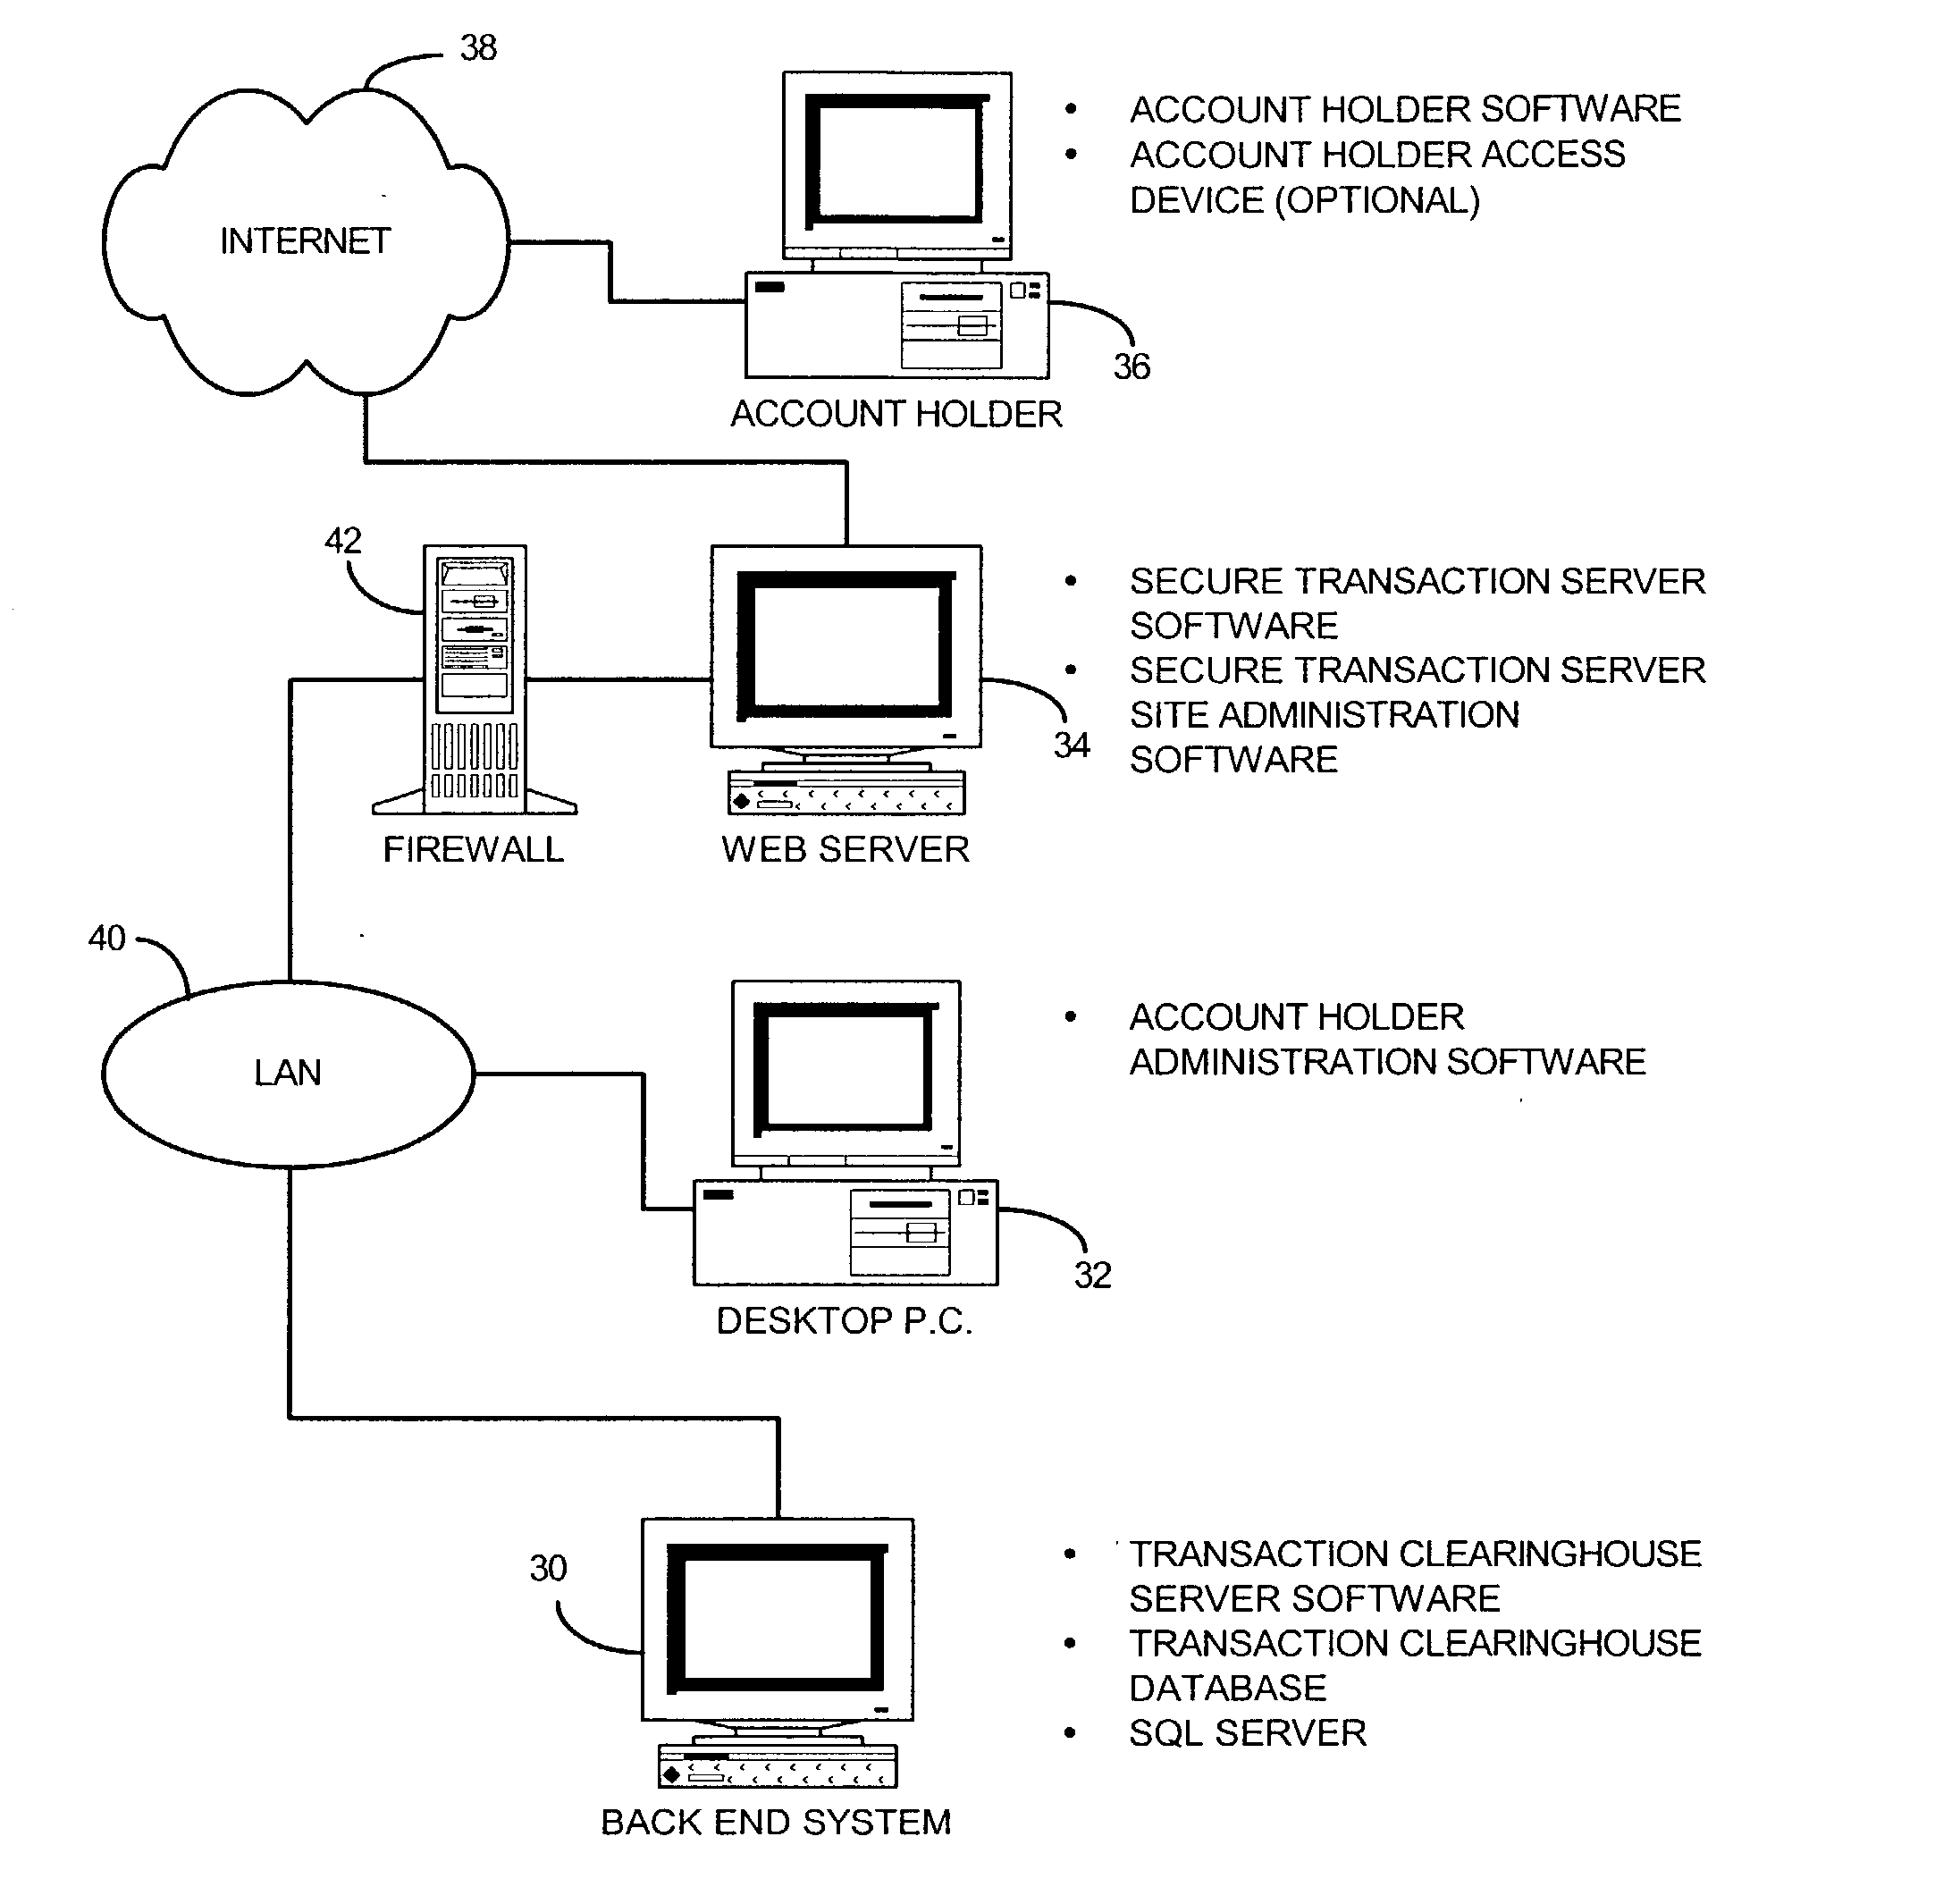 System and method for securing transactions and computer resources with an untrusted network